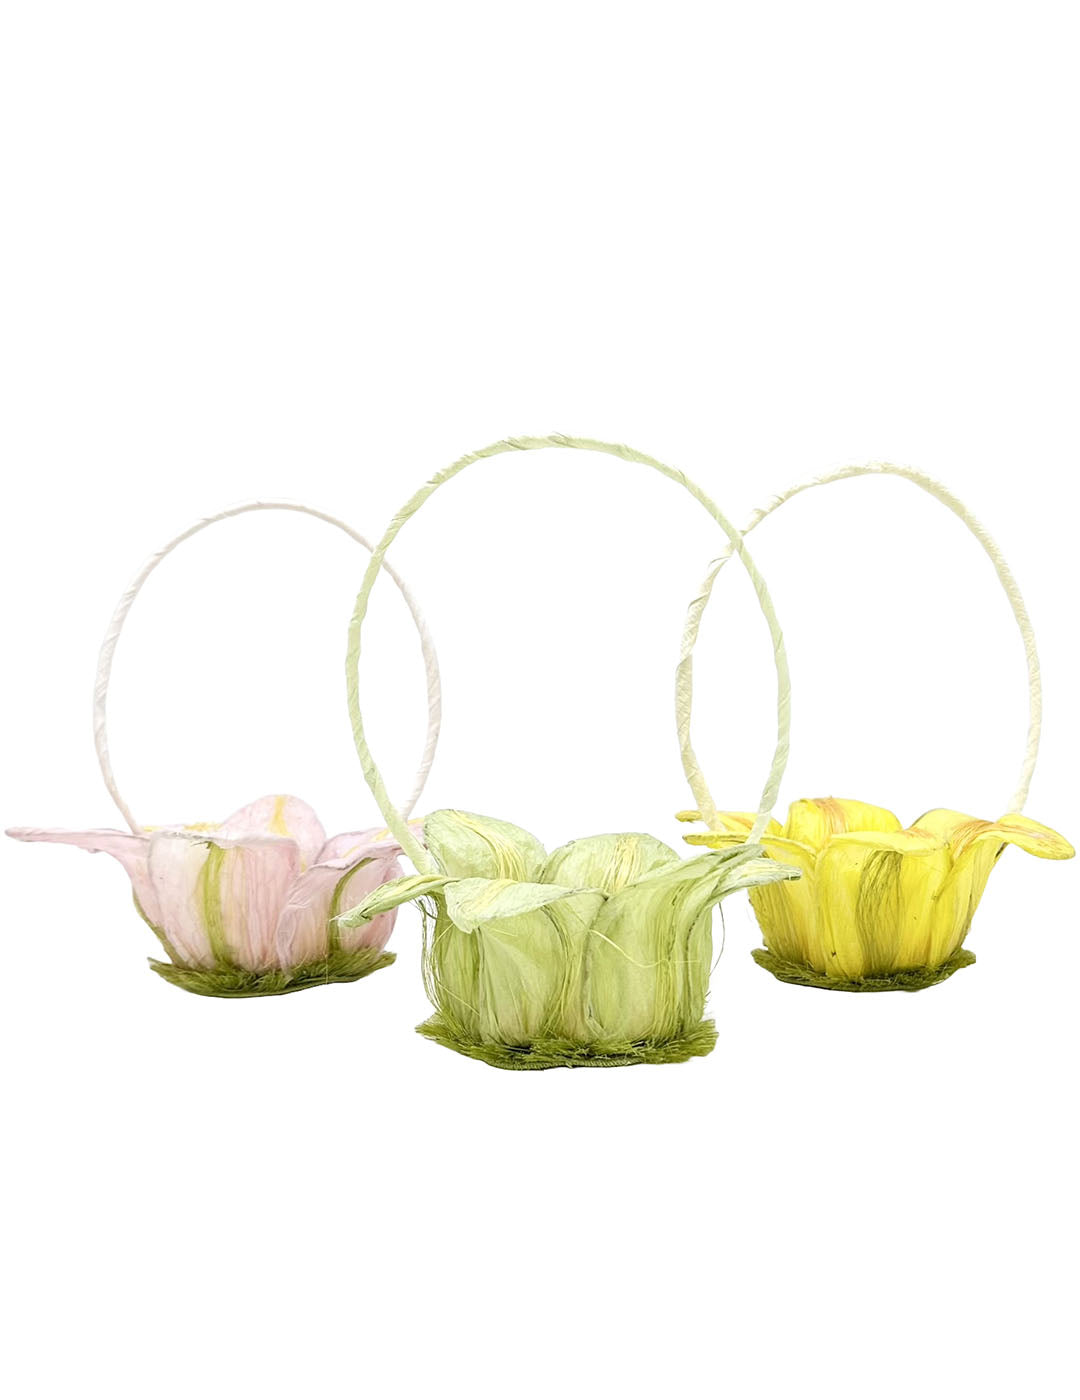 Lily Basket - Assorted Colors